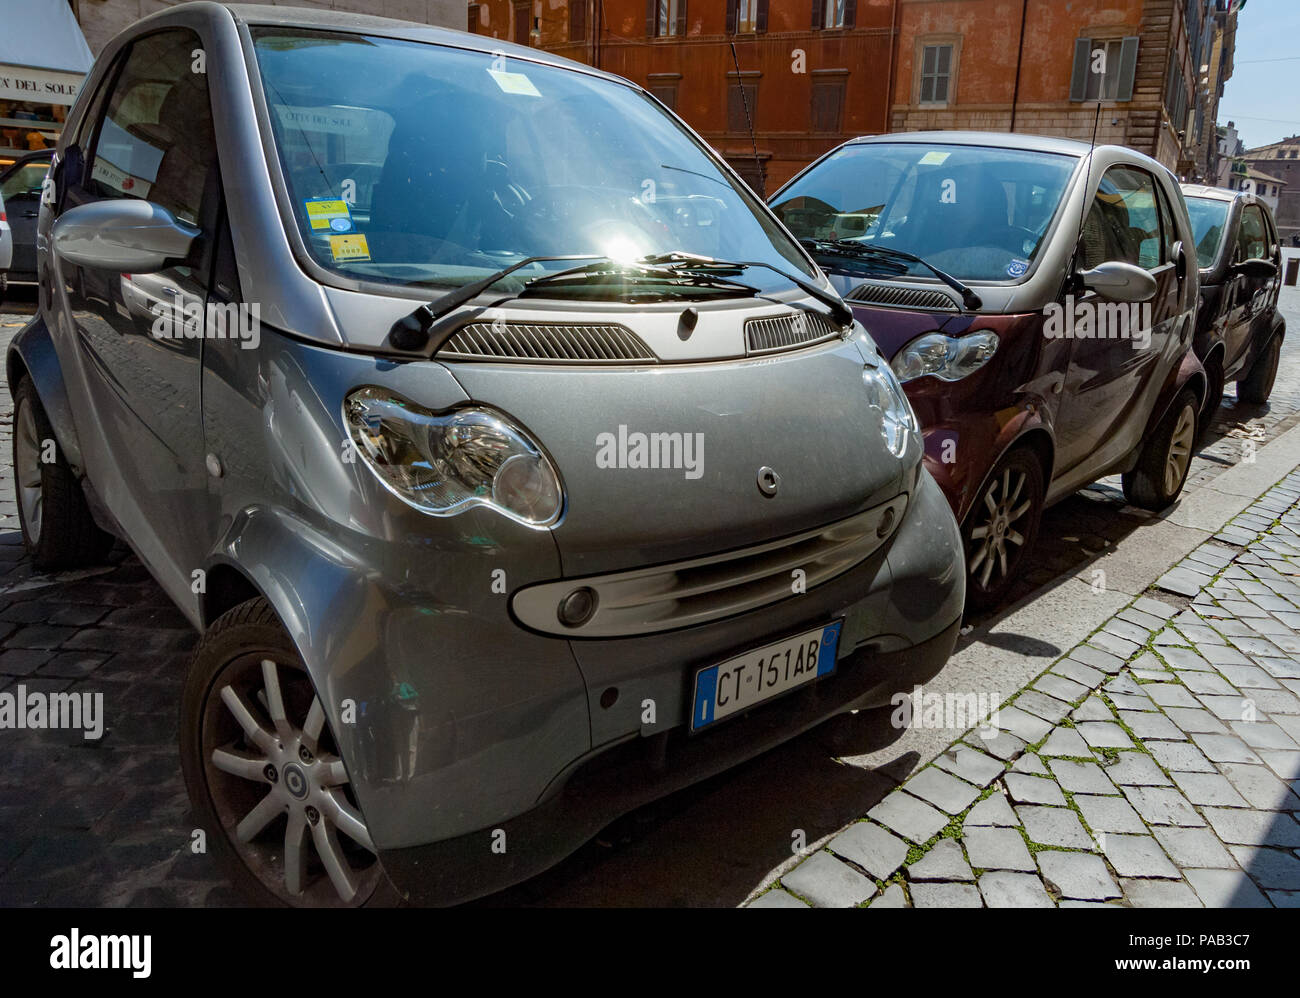 Smart cars parked haphazardly in a Rome street. Stock Photo